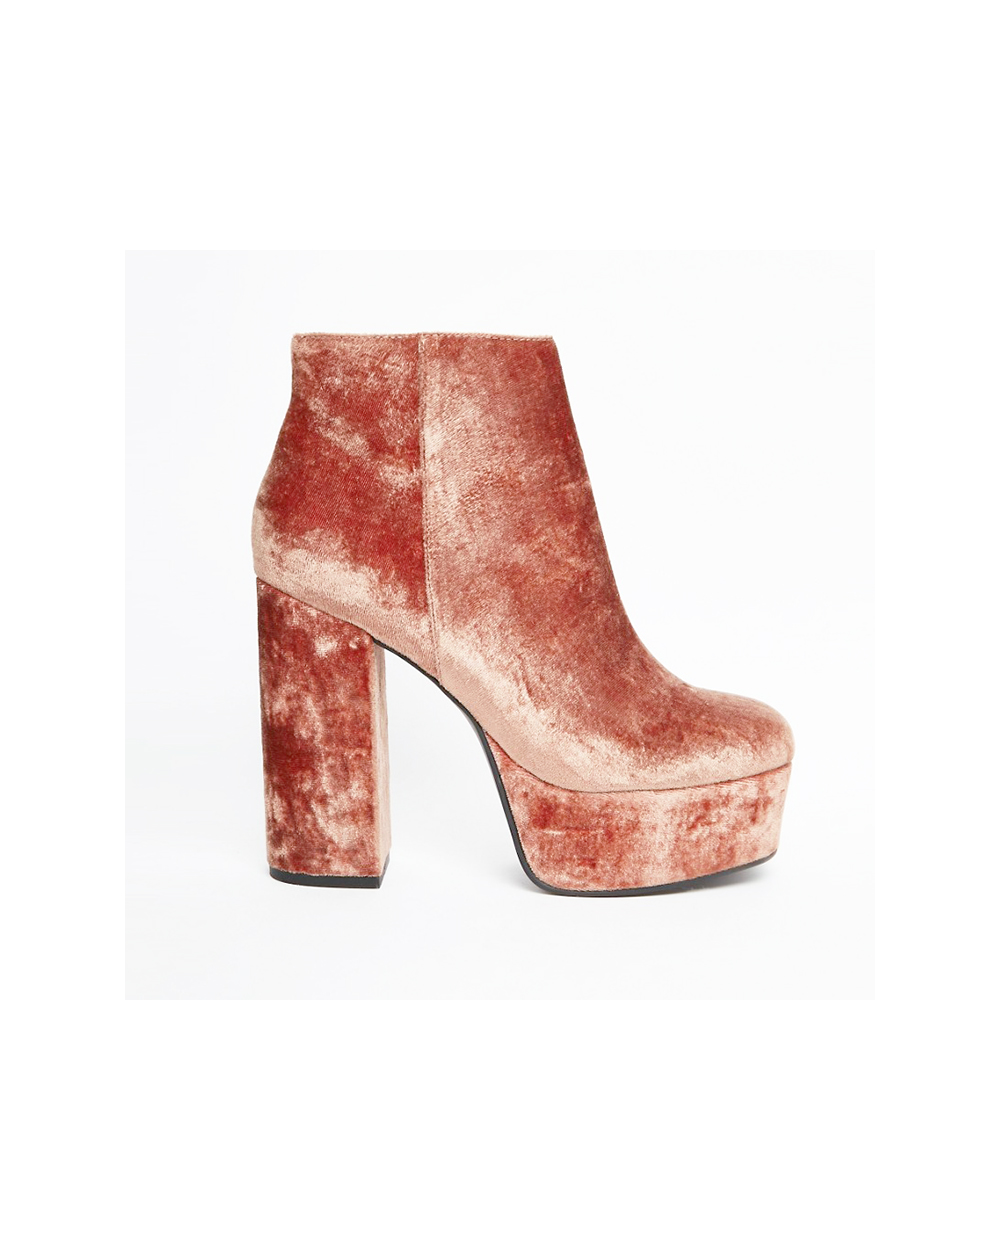 Suede Patchwork Boot, $217.12, from ASOS